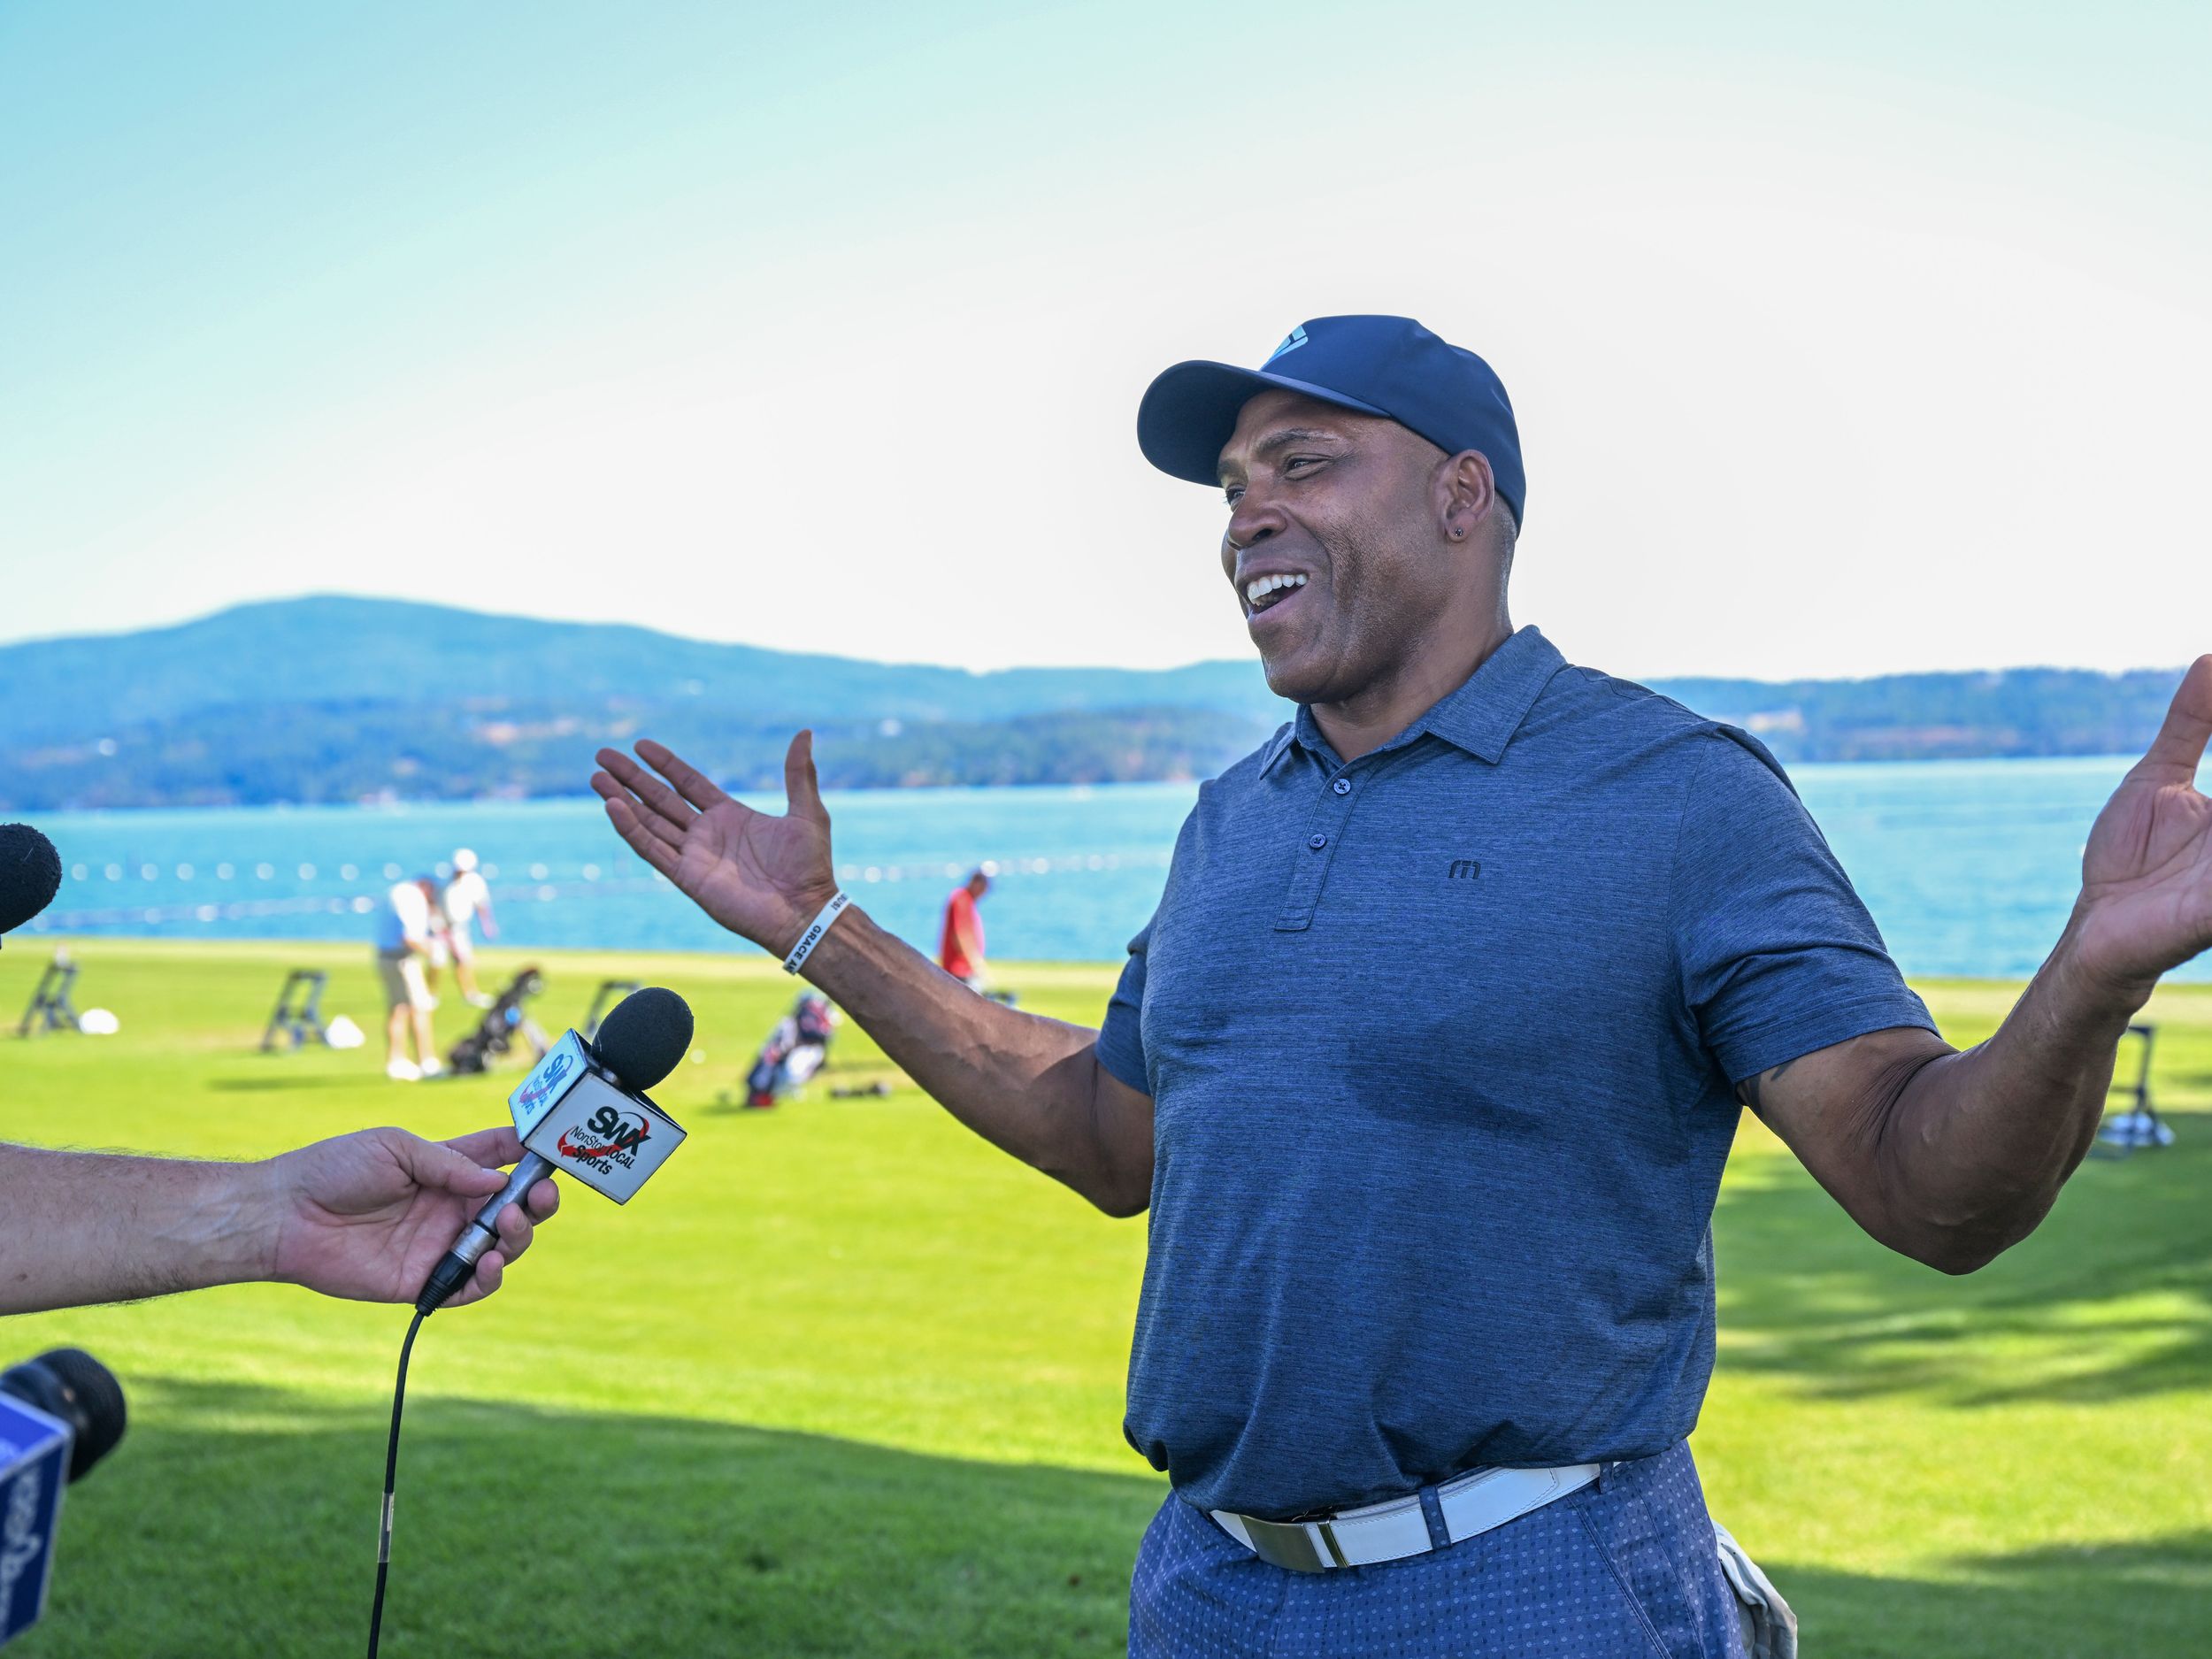 Boston Red Sox Celebrity Golf Classic events a home run for